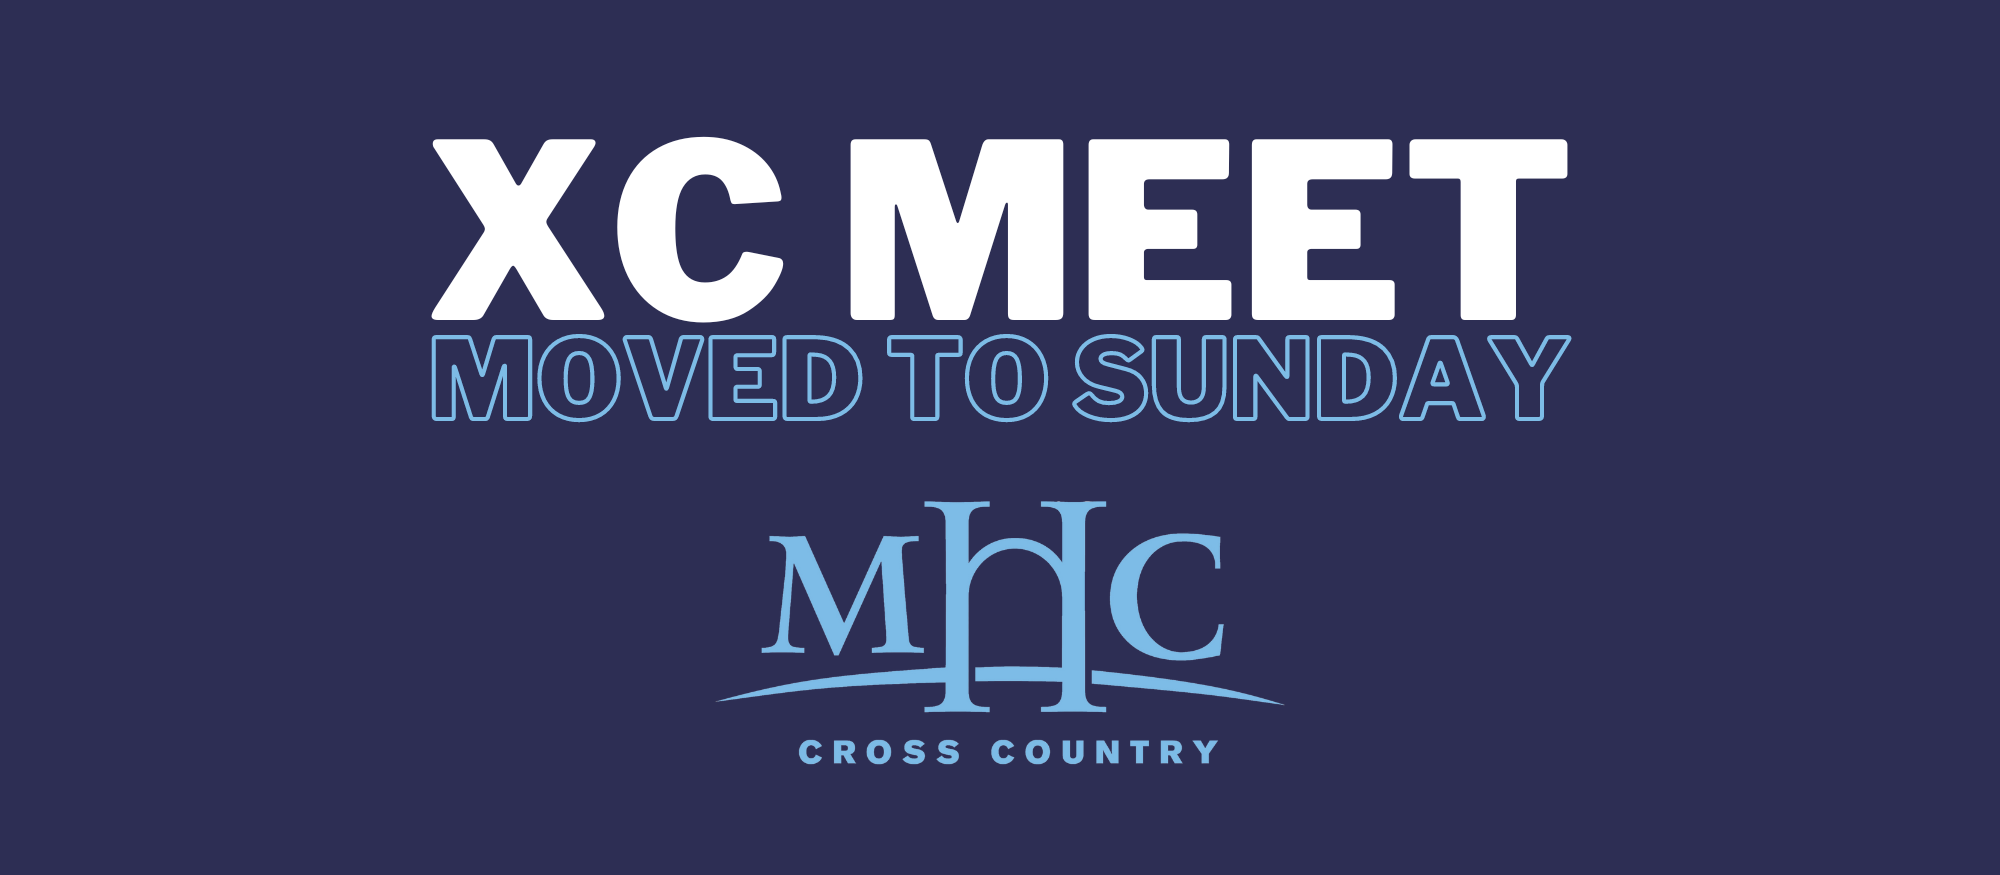 Cross country meet at UMass-Dartmouth moved to Sunday